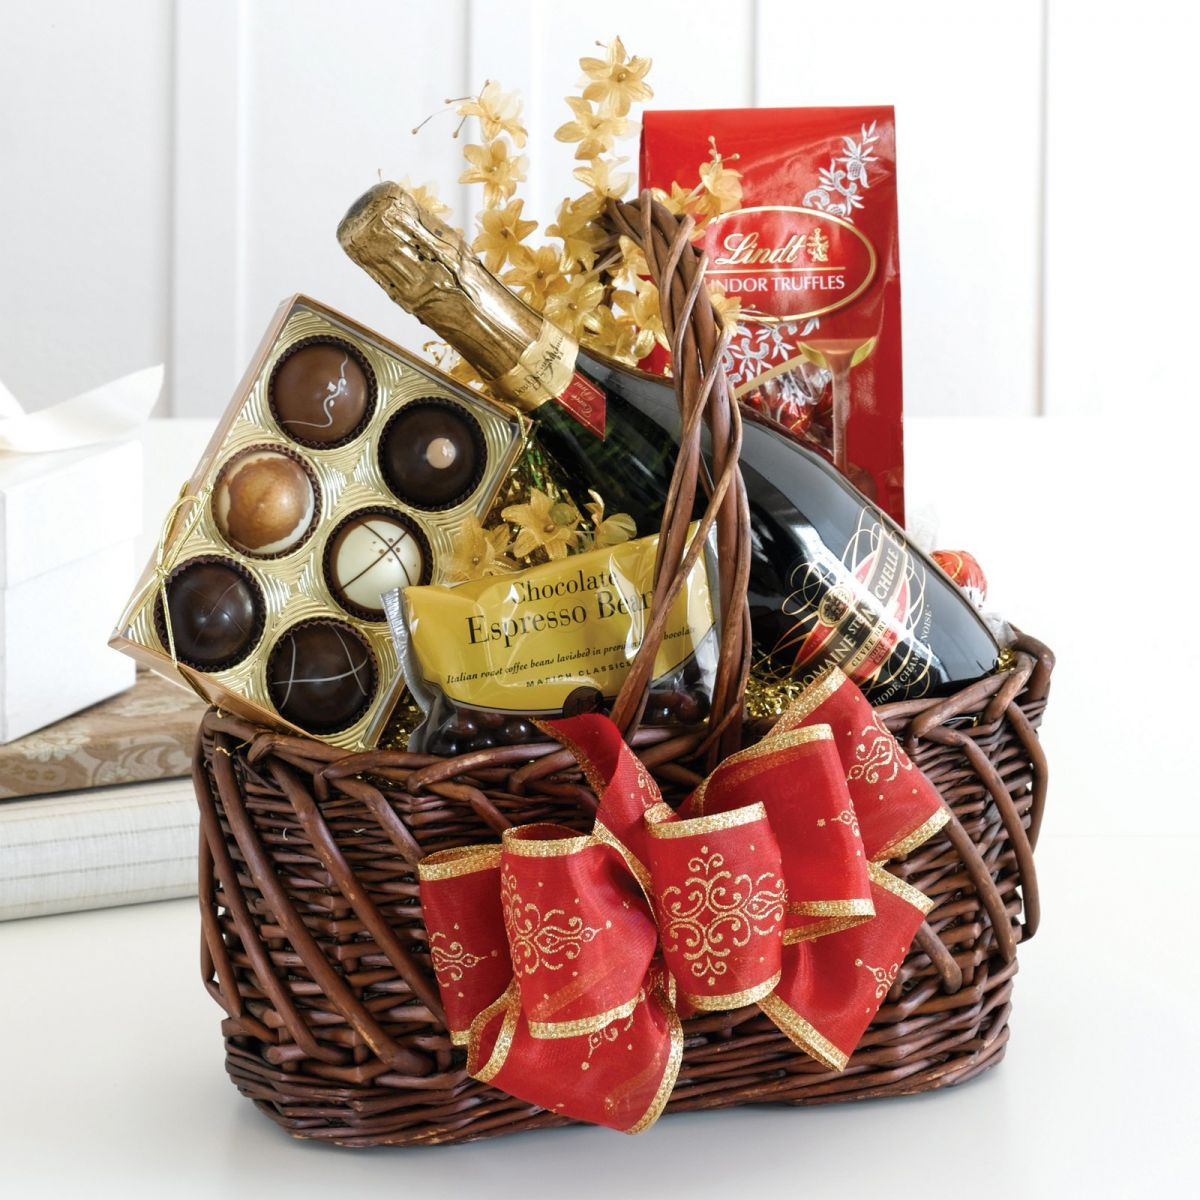 Christmas Gift Baskets Ideas
 17 Baskets Anomalous n Some Classic Christmas Gift Hamper